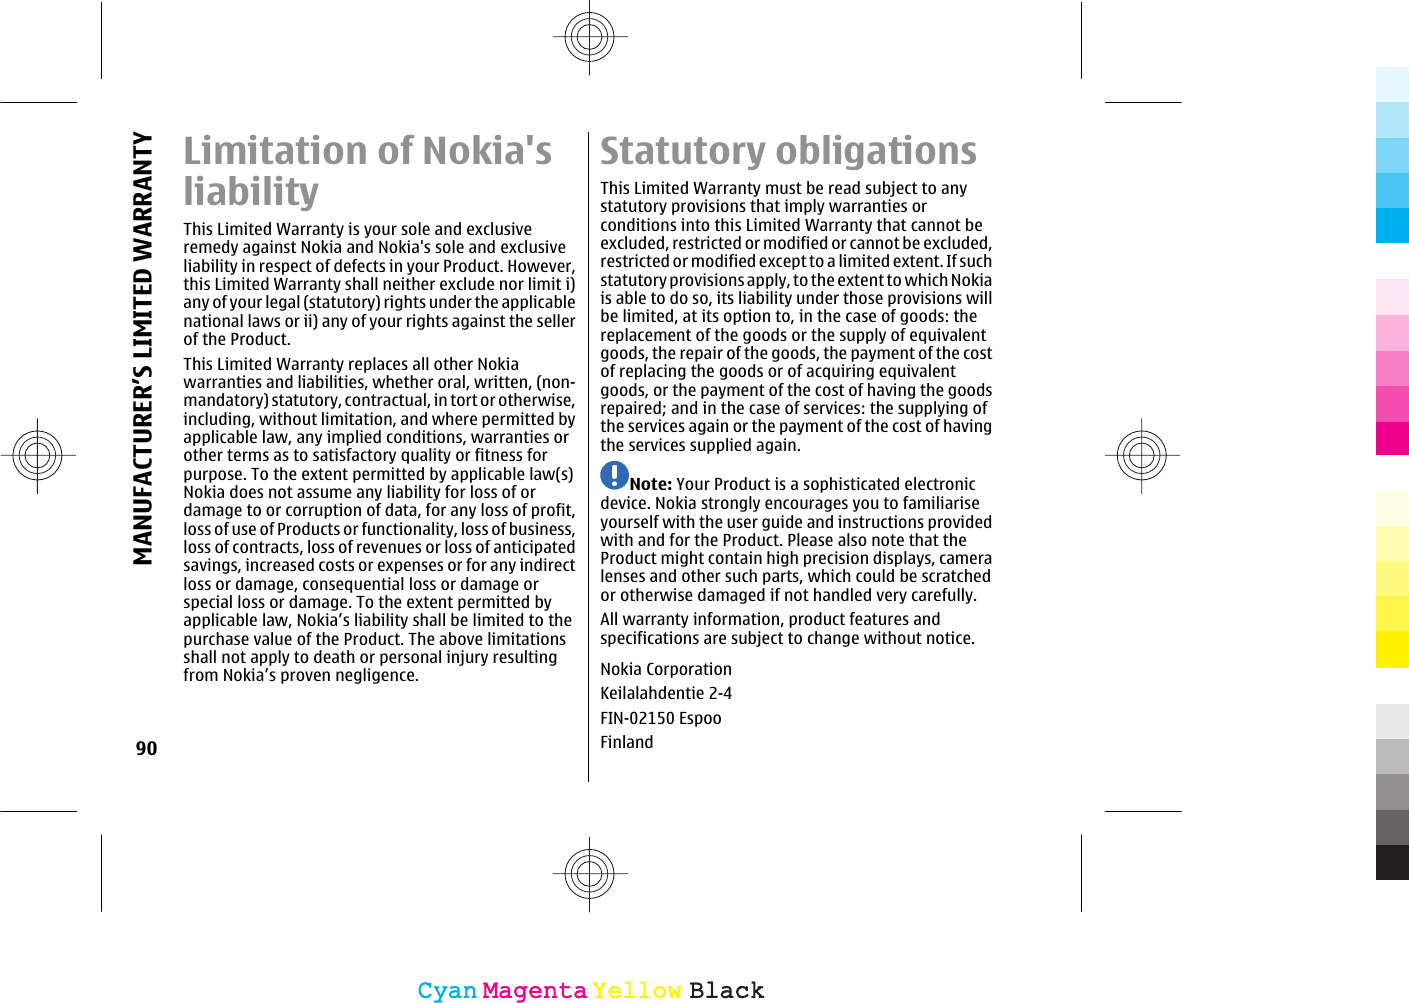 Limitation of Nokia&apos;sliabilityThis Limited Warranty is your sole and exclusiveremedy against Nokia and Nokia&apos;s sole and exclusiveliability in respect of defects in your Product. However,this Limited Warranty shall neither exclude nor limit i)any of your legal (statutory) rights under the applicablenational laws or ii) any of your rights against the sellerof the Product.This Limited Warranty replaces all other Nokiawarranties and liabilities, whether oral, written, (non-mandatory) statutory, contractual, in tort or otherwise,including, without limitation, and where permitted byapplicable law, any implied conditions, warranties orother terms as to satisfactory quality or fitness forpurpose. To the extent permitted by applicable law(s)Nokia does not assume any liability for loss of ordamage to or corruption of data, for any loss of profit,loss of use of Products or functionality, loss of business,loss of contracts, loss of revenues or loss of anticipatedsavings, increased costs or expenses or for any indirectloss or damage, consequential loss or damage orspecial loss or damage. To the extent permitted byapplicable law, Nokia’s liability shall be limited to thepurchase value of the Product. The above limitationsshall not apply to death or personal injury resultingfrom Nokia’s proven negligence.Statutory obligationsThis Limited Warranty must be read subject to anystatutory provisions that imply warranties orconditions into this Limited Warranty that cannot beexcluded, restricted or modified or cannot be excluded,restricted or modified except to a limited extent. If suchstatutory provisions apply, to the extent to which Nokiais able to do so, its liability under those provisions willbe limited, at its option to, in the case of goods: thereplacement of the goods or the supply of equivalentgoods, the repair of the goods, the payment of the costof replacing the goods or of acquiring equivalentgoods, or the payment of the cost of having the goodsrepaired; and in the case of services: the supplying ofthe services again or the payment of the cost of havingthe services supplied again.Note: Your Product is a sophisticated electronicdevice. Nokia strongly encourages you to familiariseyourself with the user guide and instructions providedwith and for the Product. Please also note that theProduct might contain high precision displays, cameralenses and other such parts, which could be scratchedor otherwise damaged if not handled very carefully.All warranty information, product features andspecifications are subject to change without notice.Nokia CorporationKeilalahdentie 2-4FIN-02150 EspooFinland90MANUFACTURER’S LIMITED WARRANTYCyanCyanMagentaMagentaYellowYellowBlackBlack